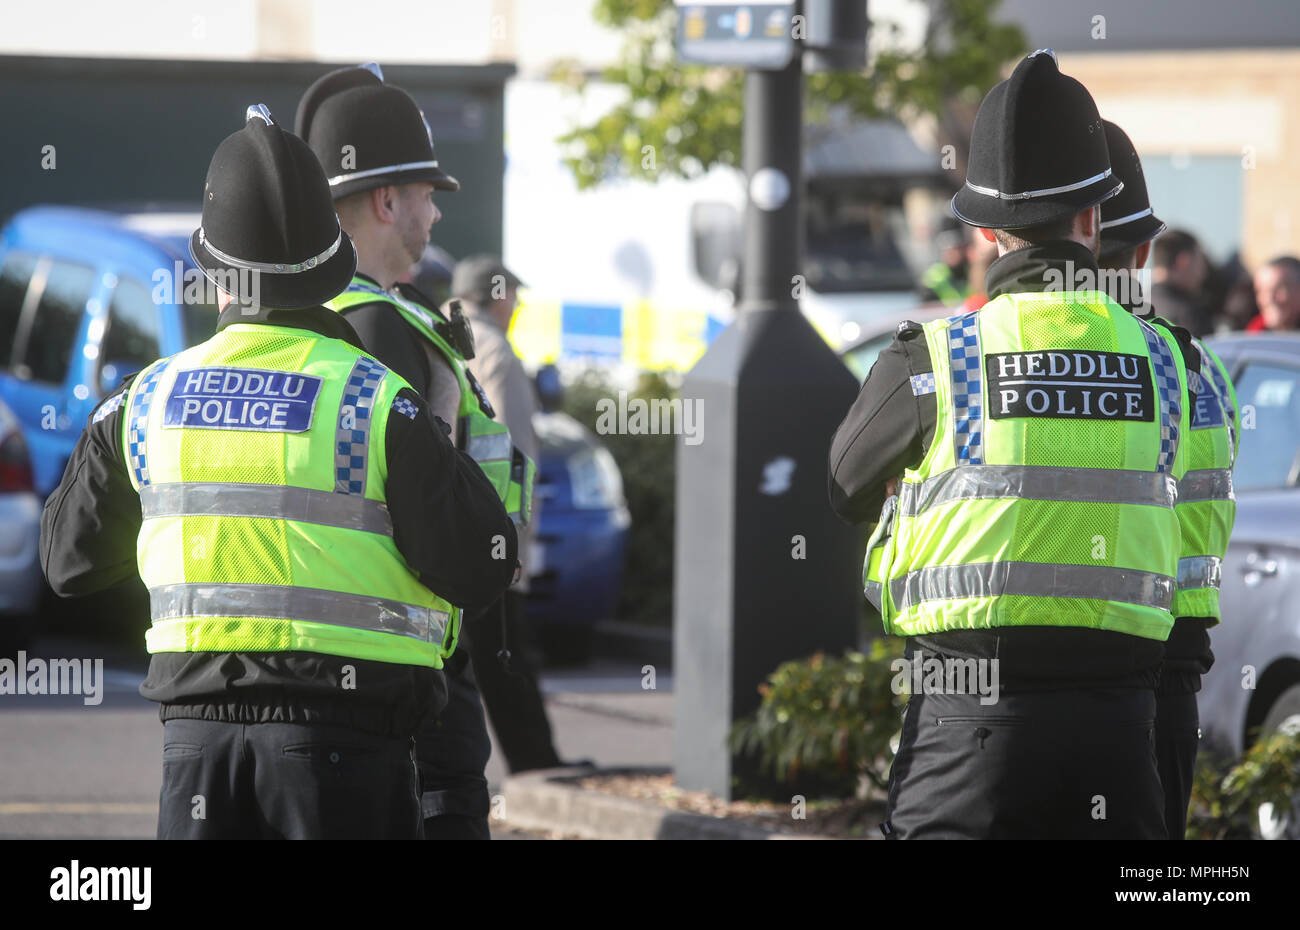 South Wales Police Force police officers on duty at a football match in Swansea ,Wales Stock Photo